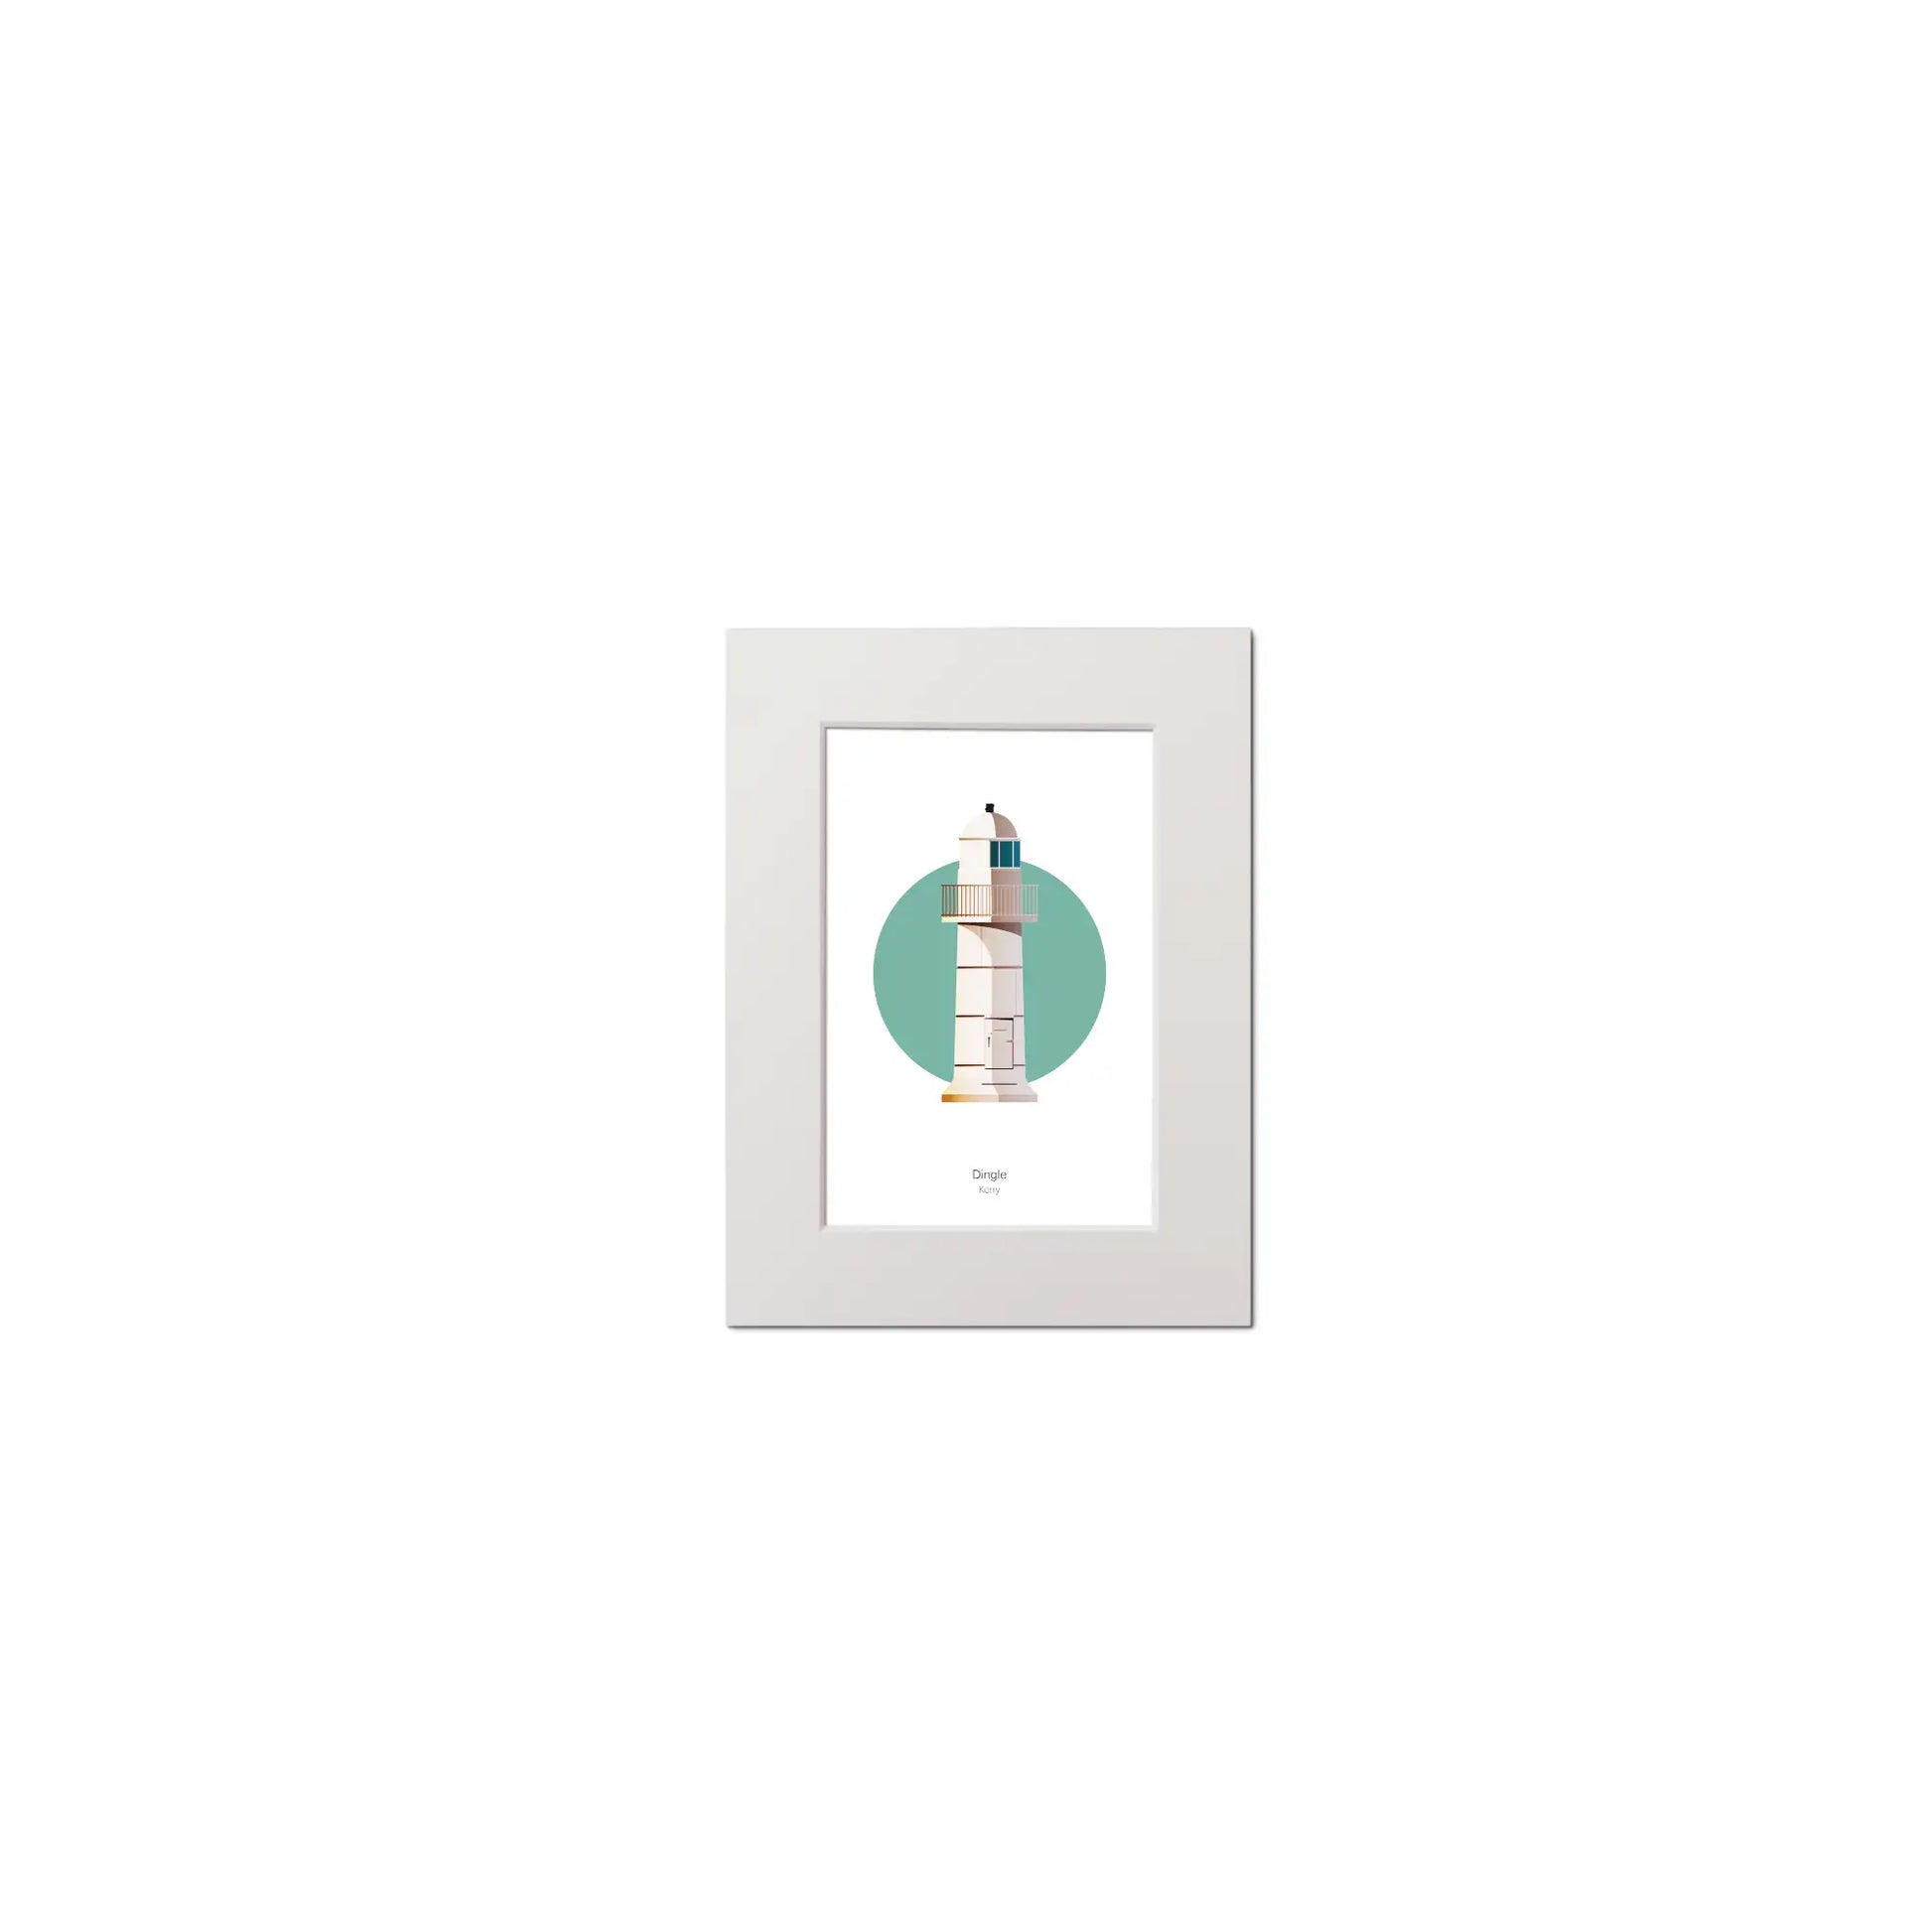 Illustration of Dingle lighthouse on a white background inside light blue square, mounted and measuring 15x20cm.